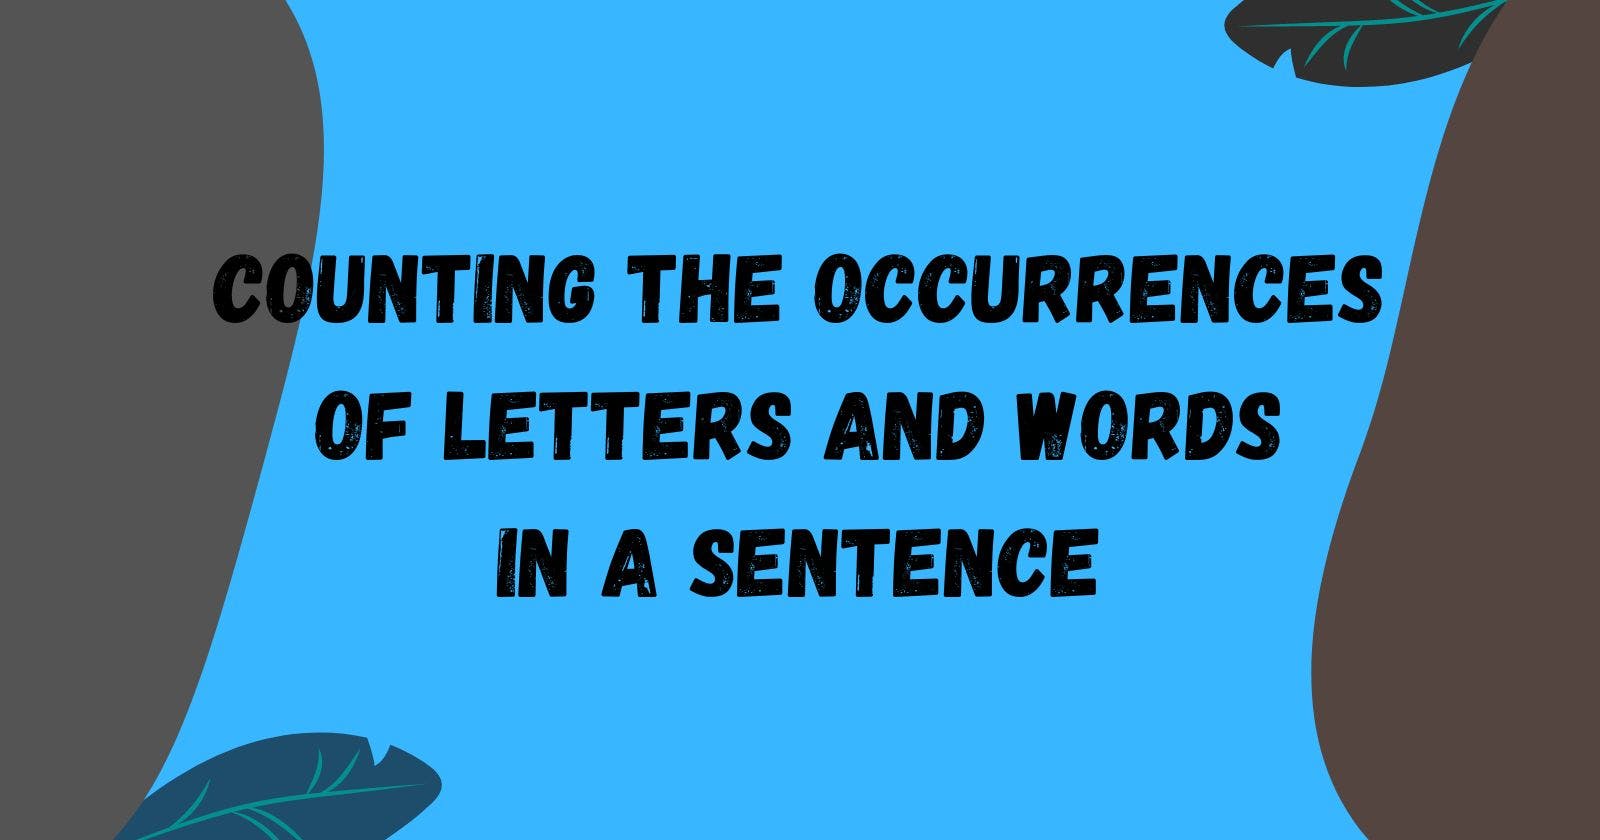 Counting the Occurrences of Letters and Words in a Sentence Using Python